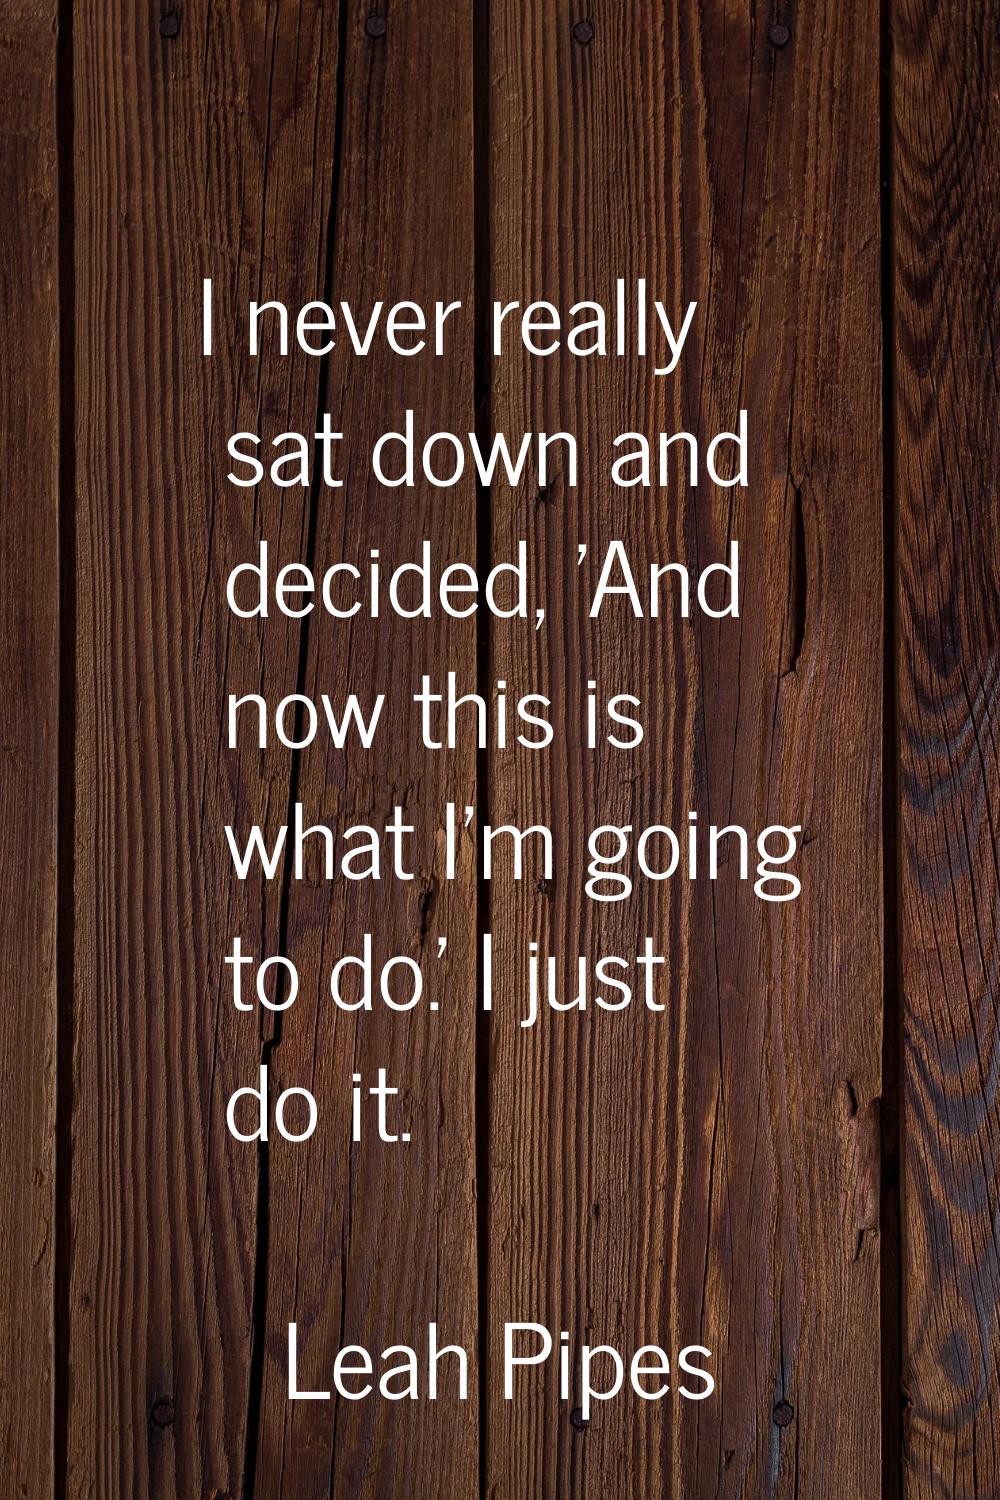 I never really sat down and decided, 'And now this is what I'm going to do.' I just do it.